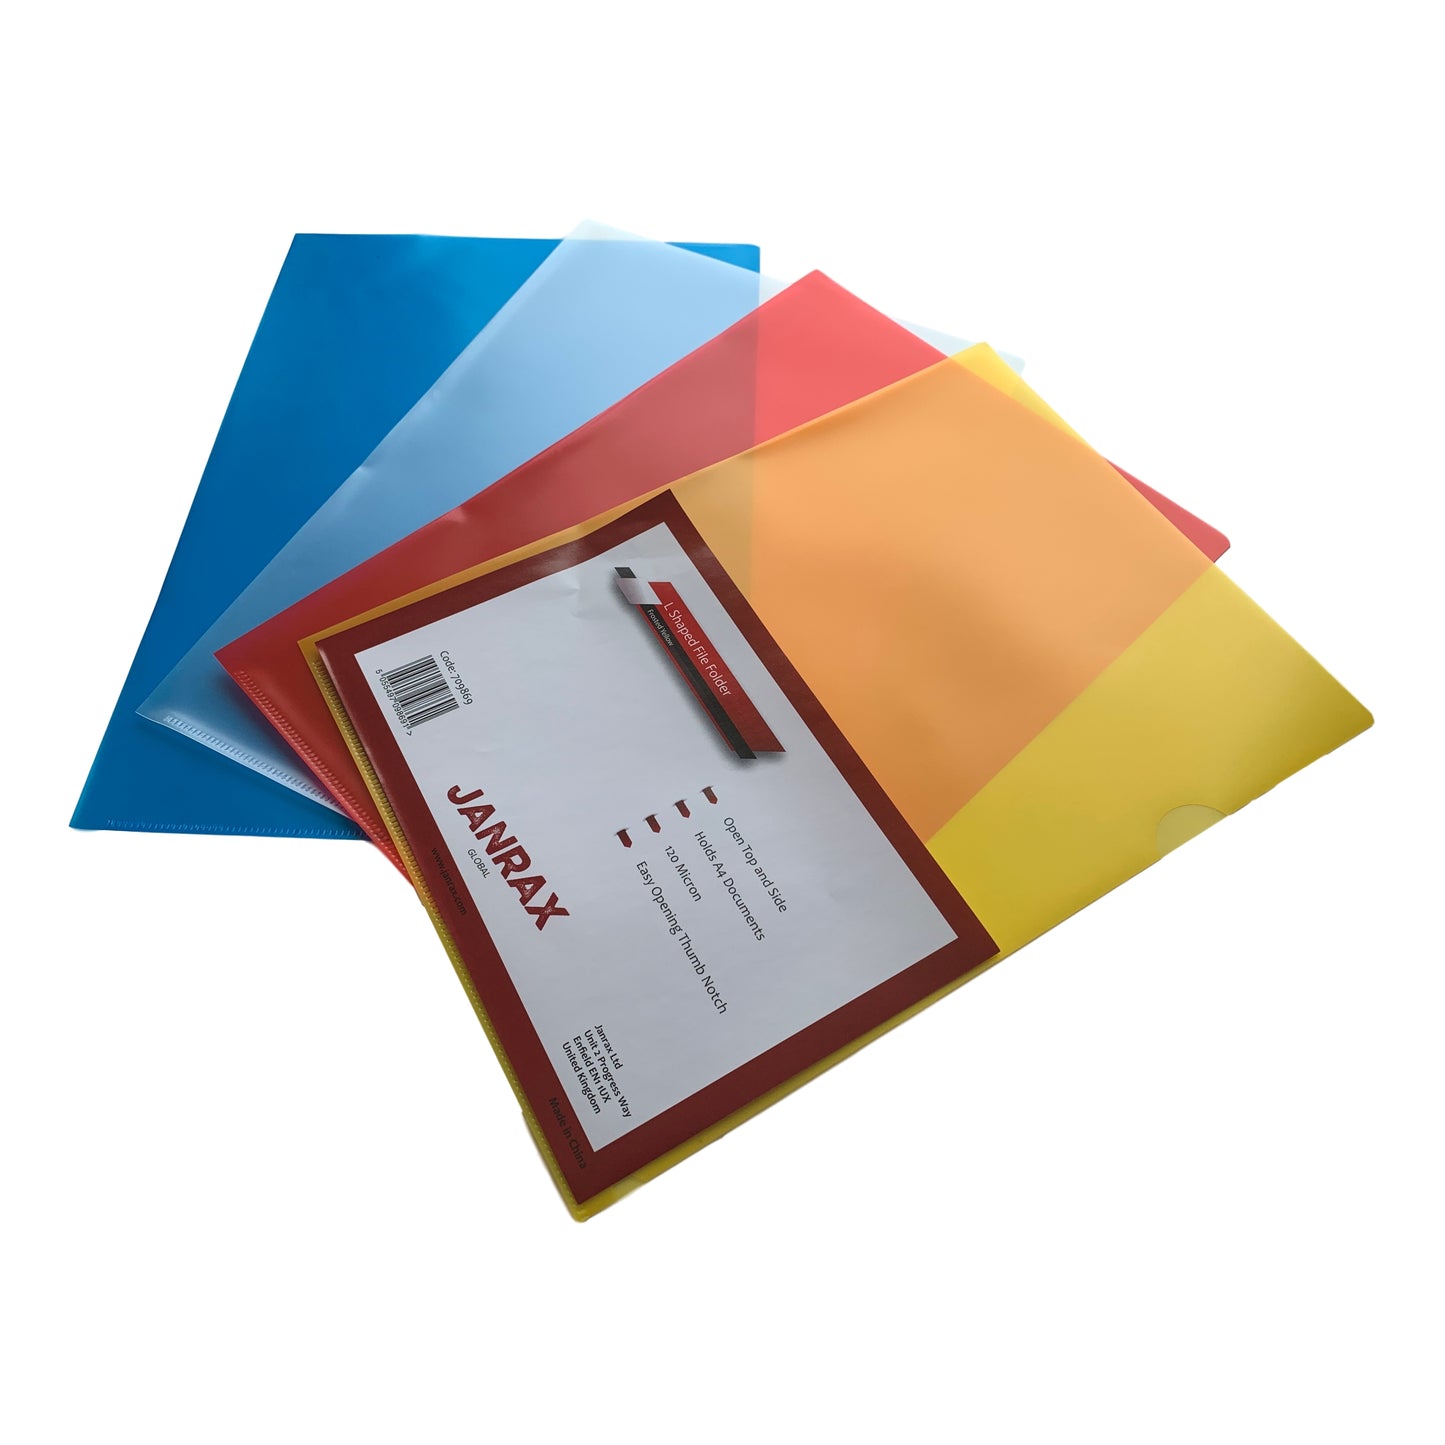 Pack of 50 A4 Yellow L Shaped Open Top and Side Report File Folders